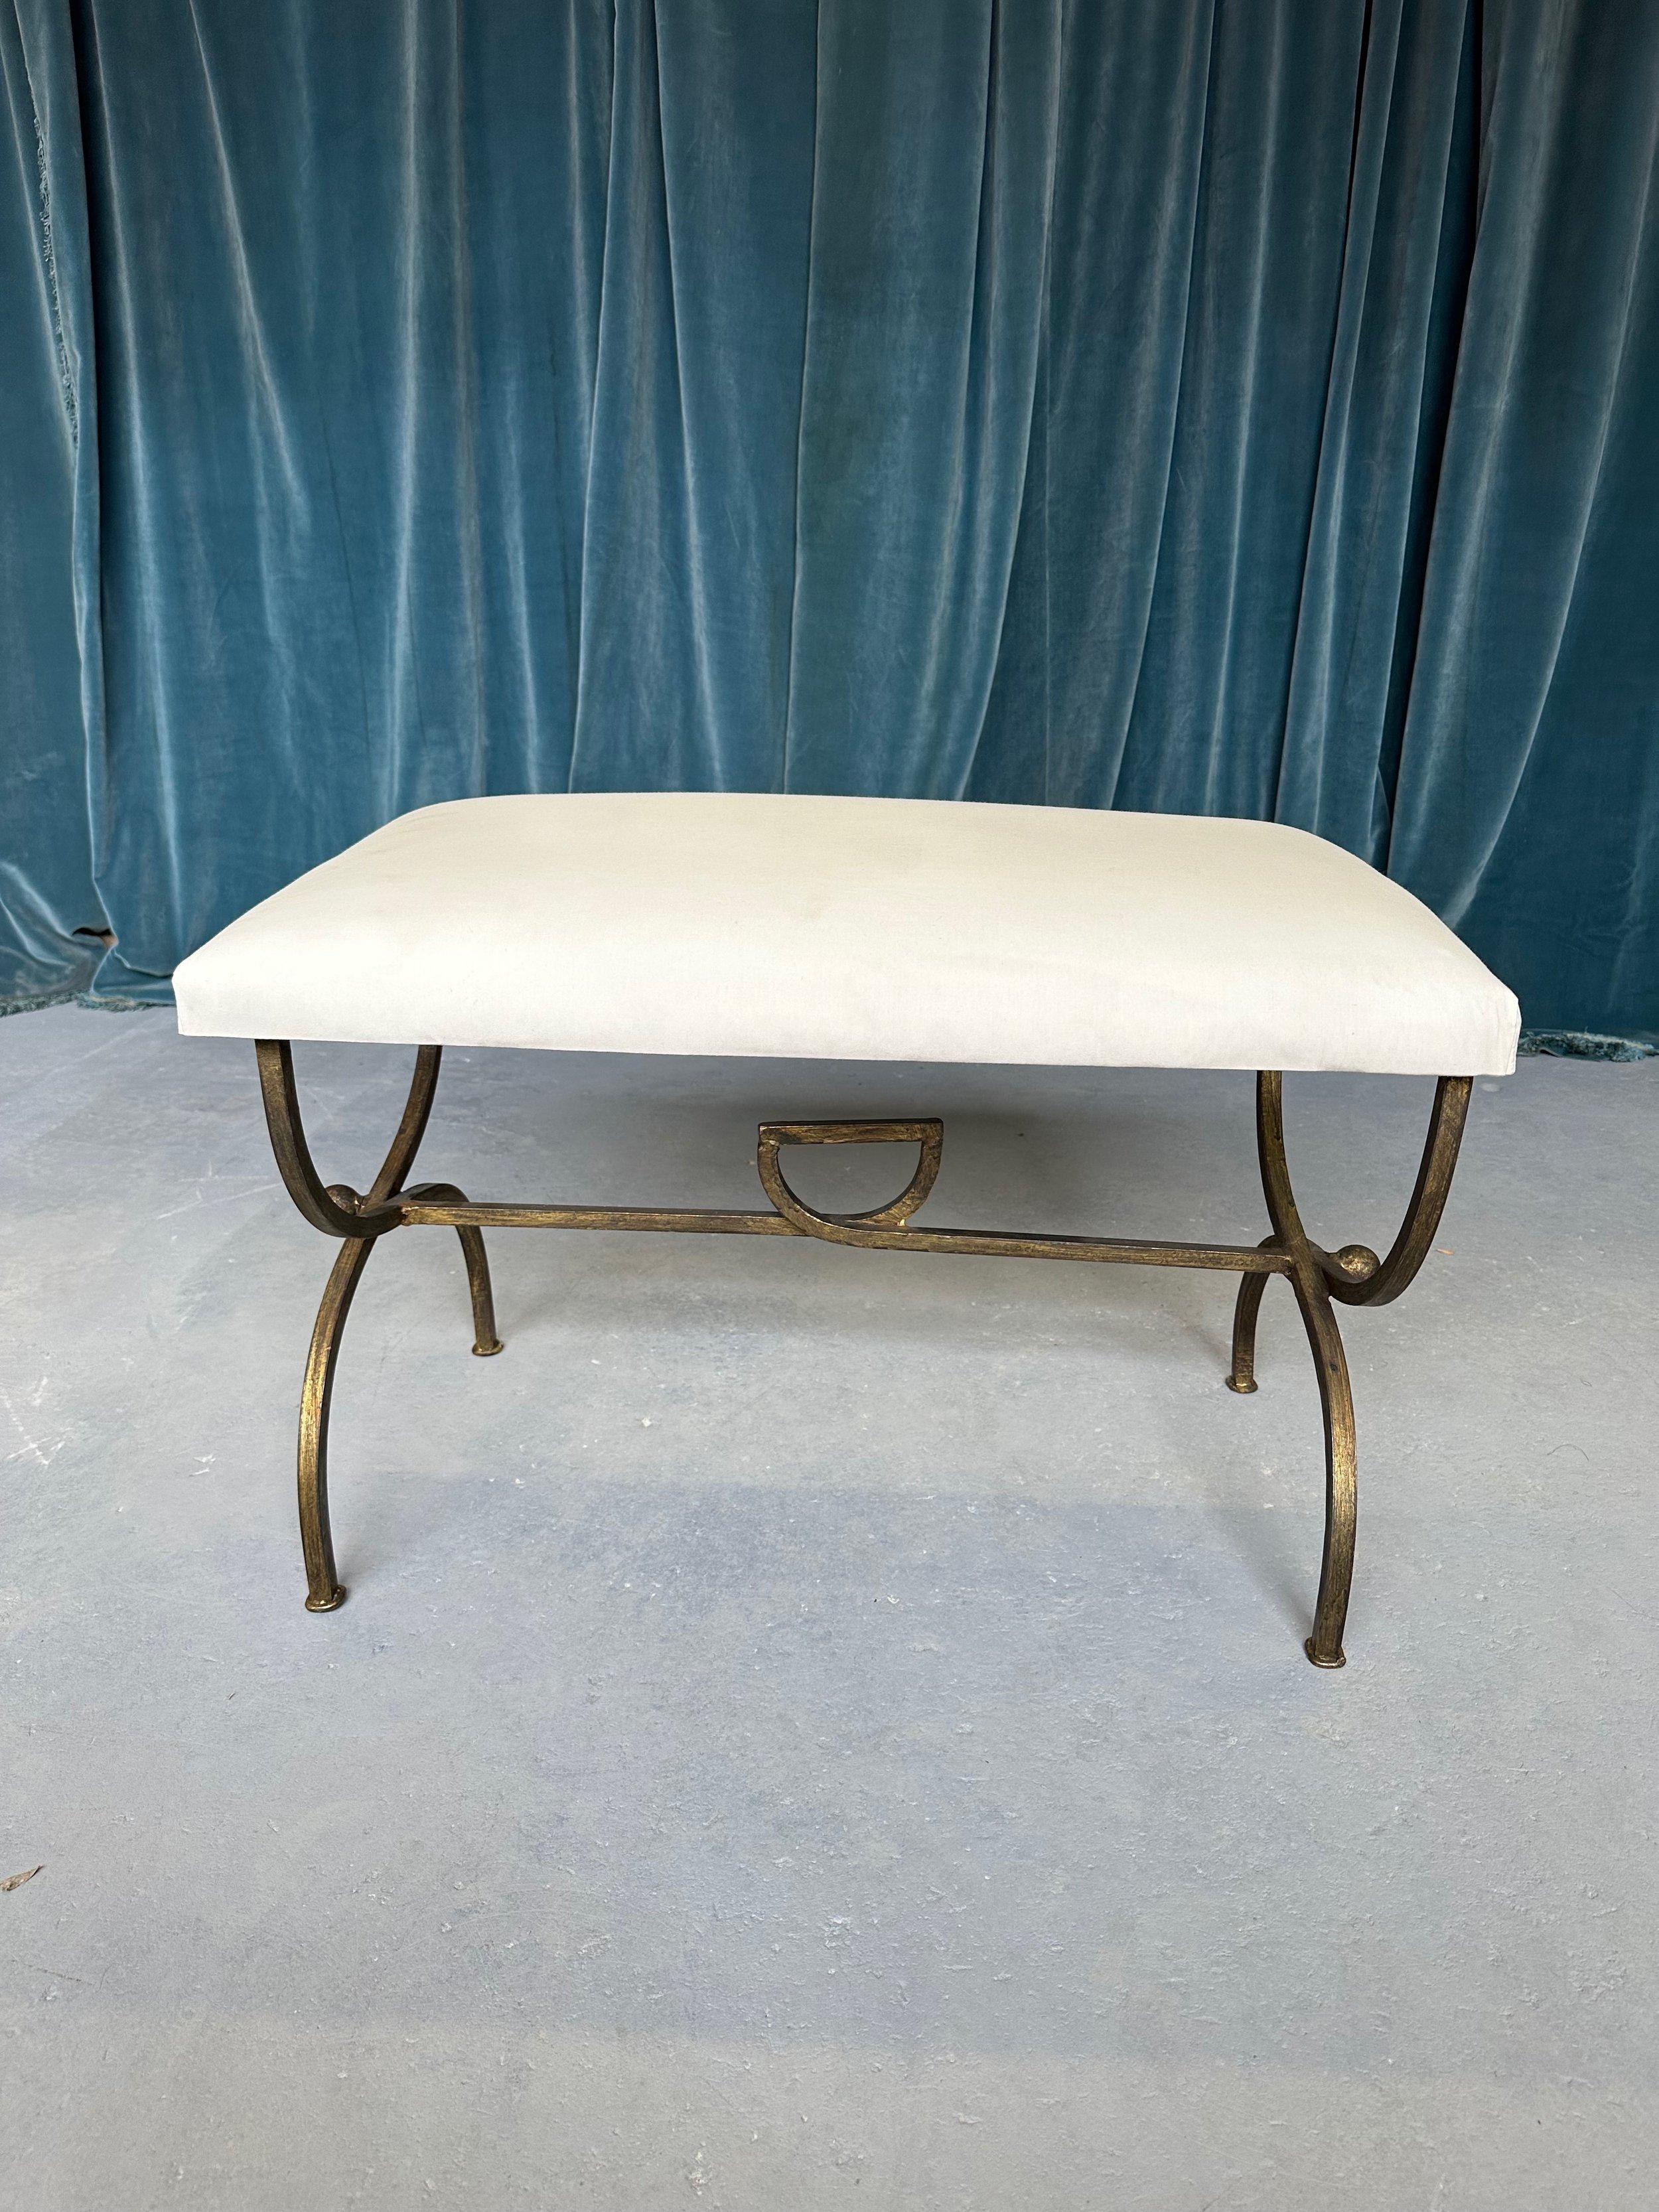 Gilt Iron Bench in Muslin In Good Condition For Sale In Buchanan, NY